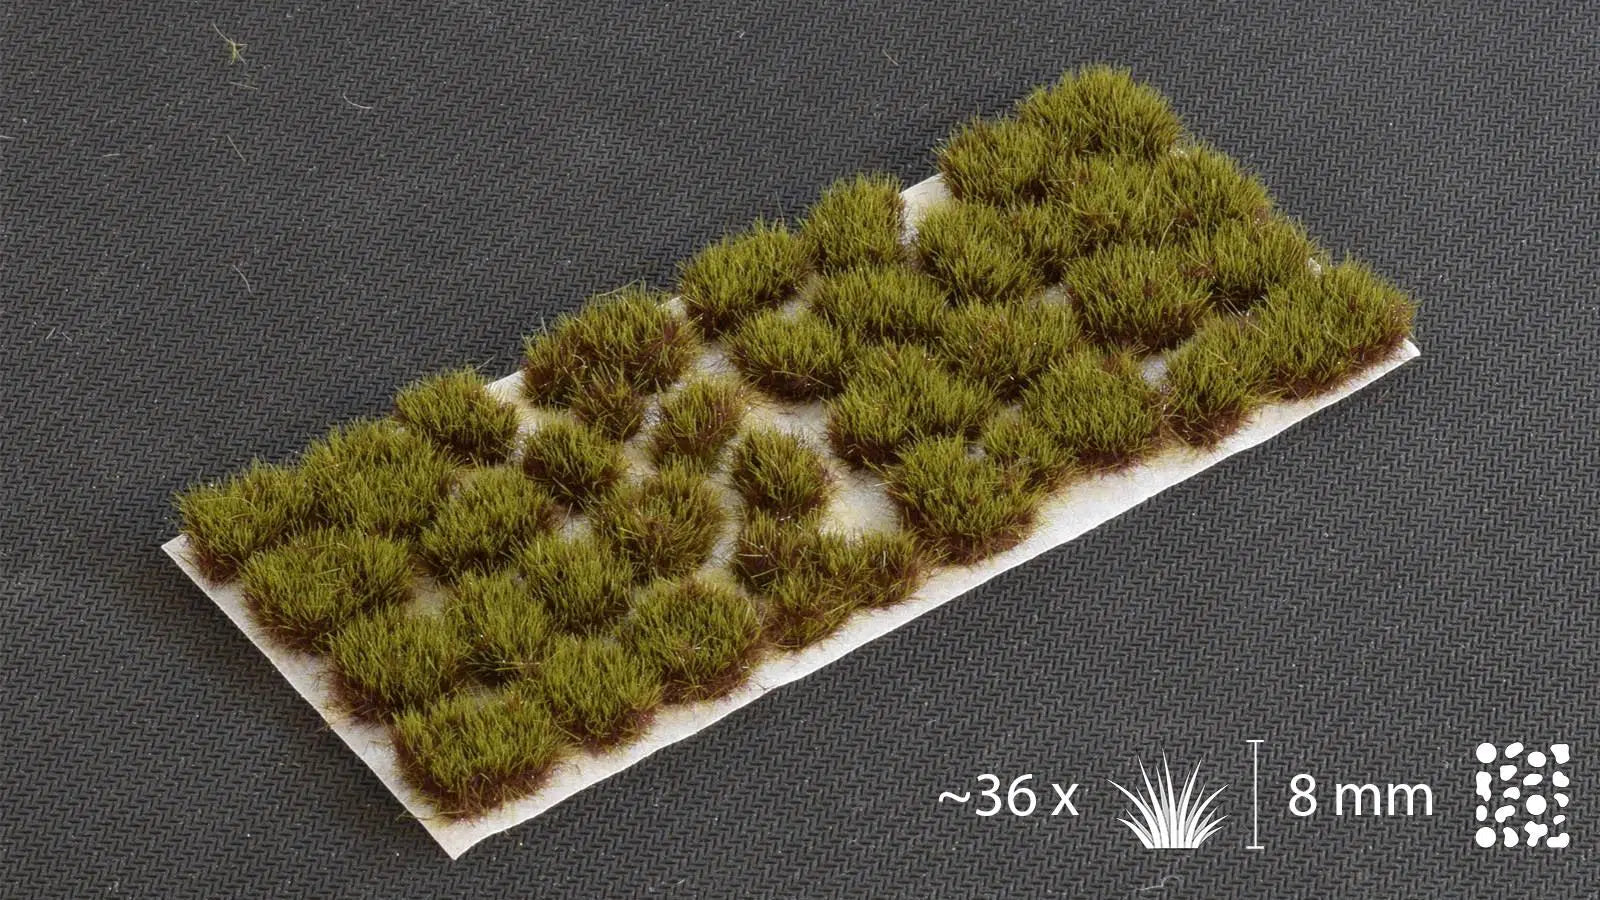 Gamers Grass: Swamp XL Tufts (8mm)